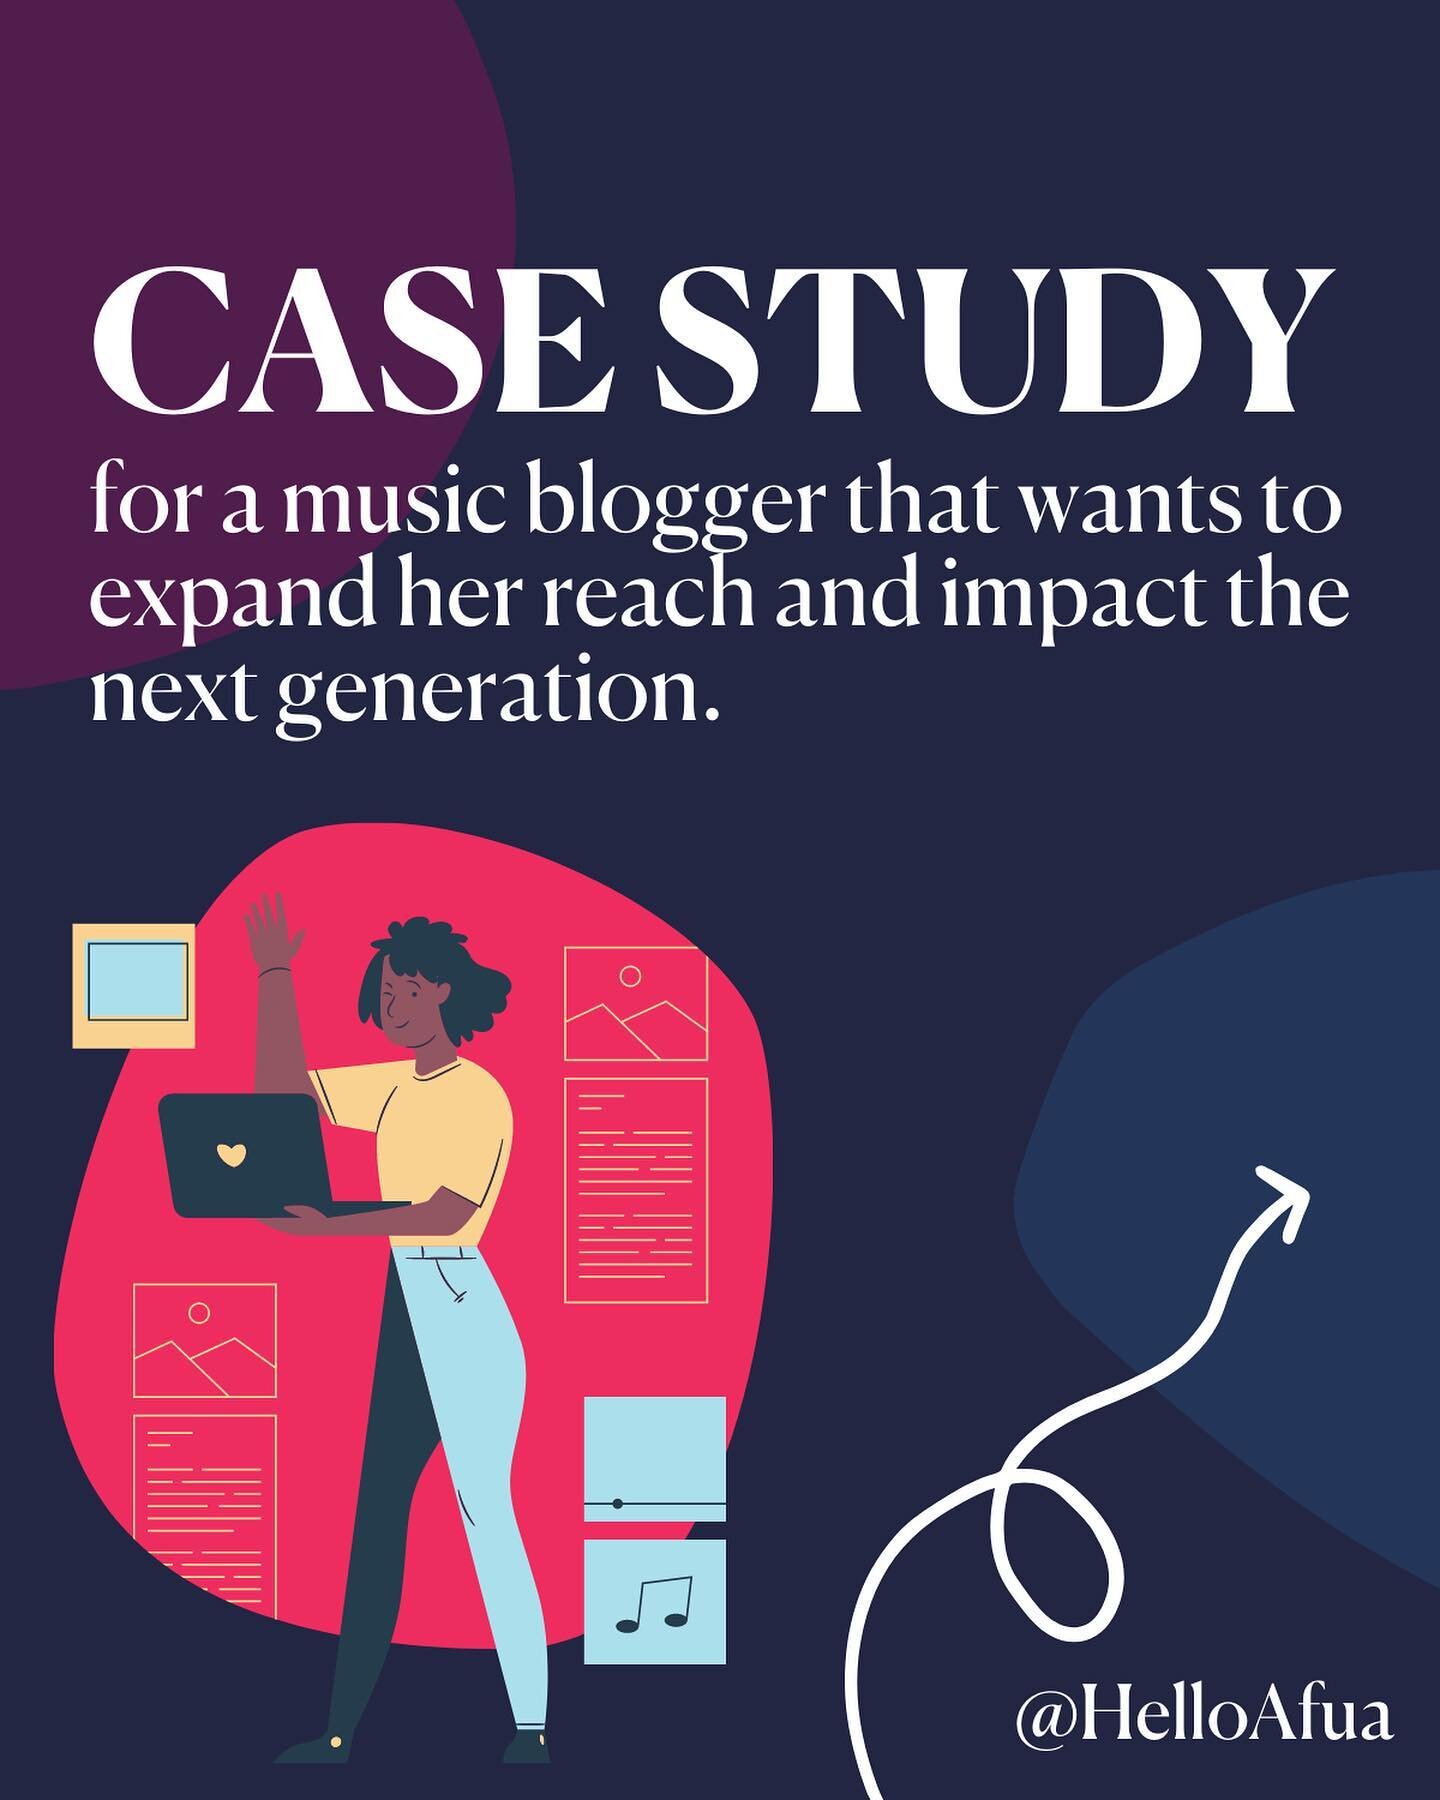 SAVE and SHARE this with the writers, bloggers and creatives who want to expand their impact and position their expertise for corporate opportunities.

✍🏾Create an online course that is focused on up and coming creators in your niche and focus it on